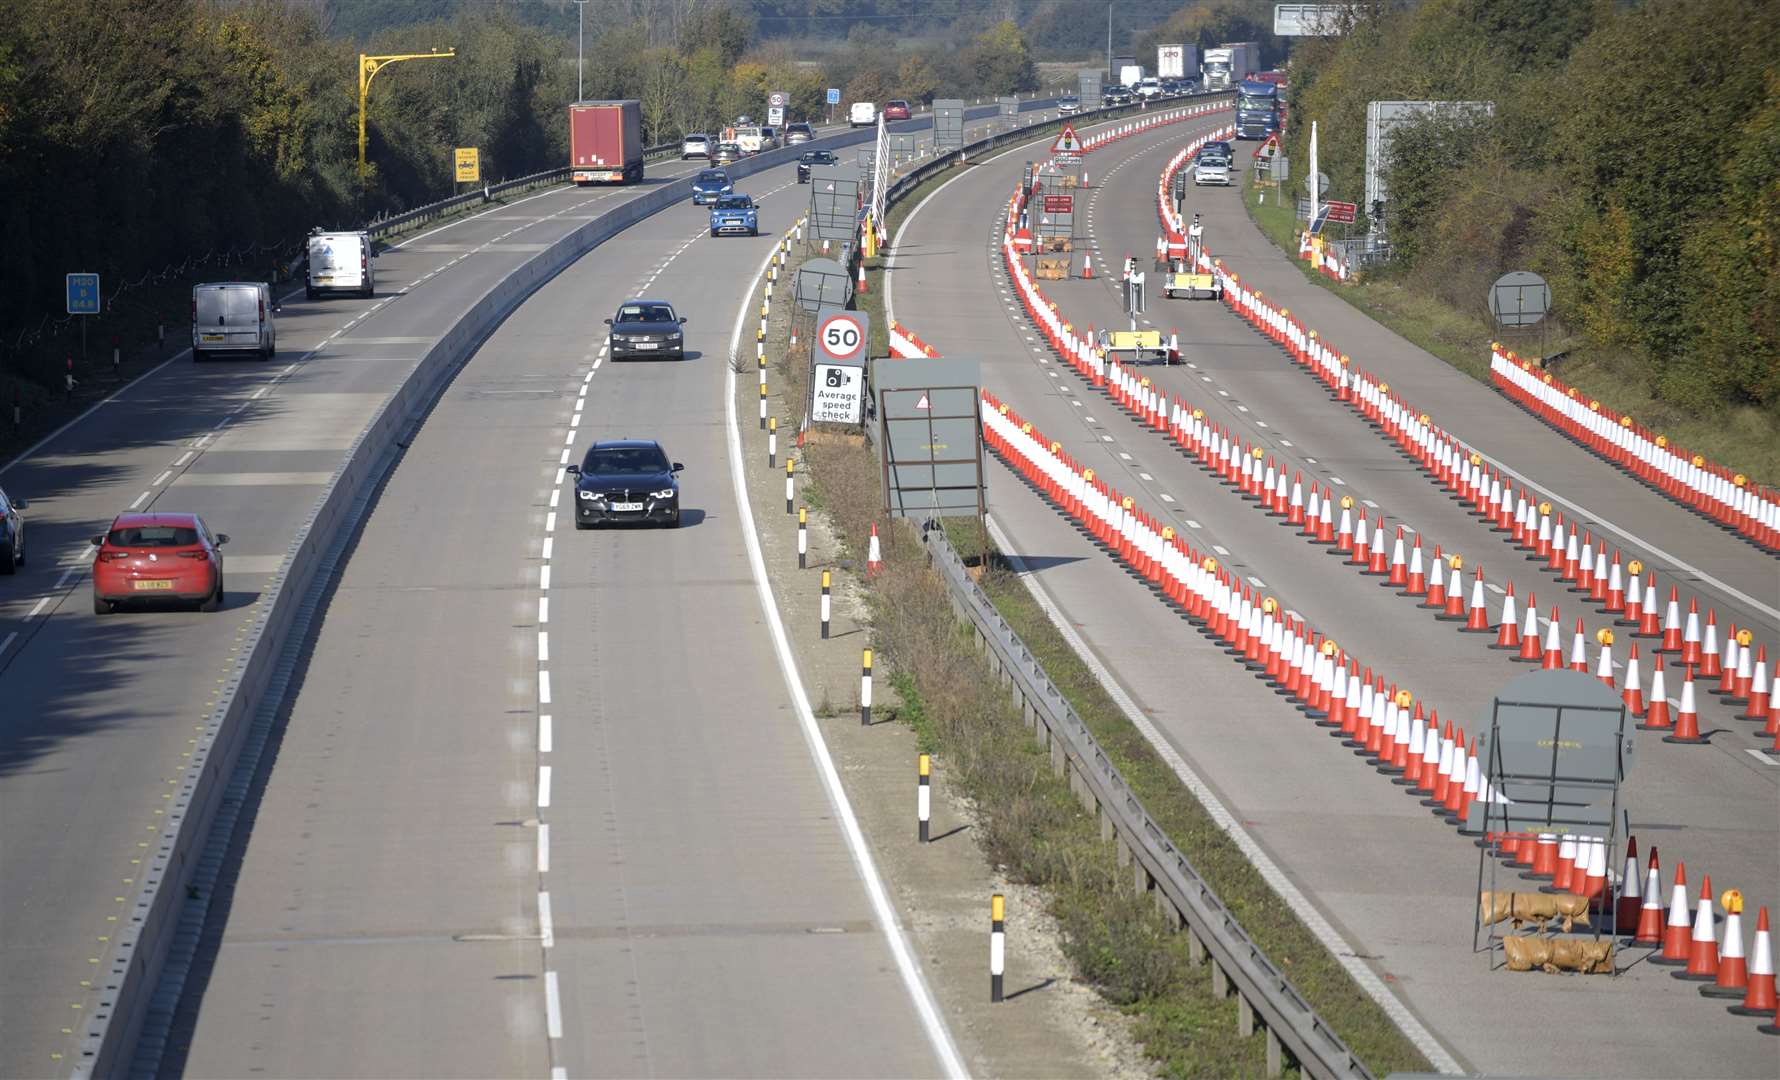 The M20 barriers were installed in March last year